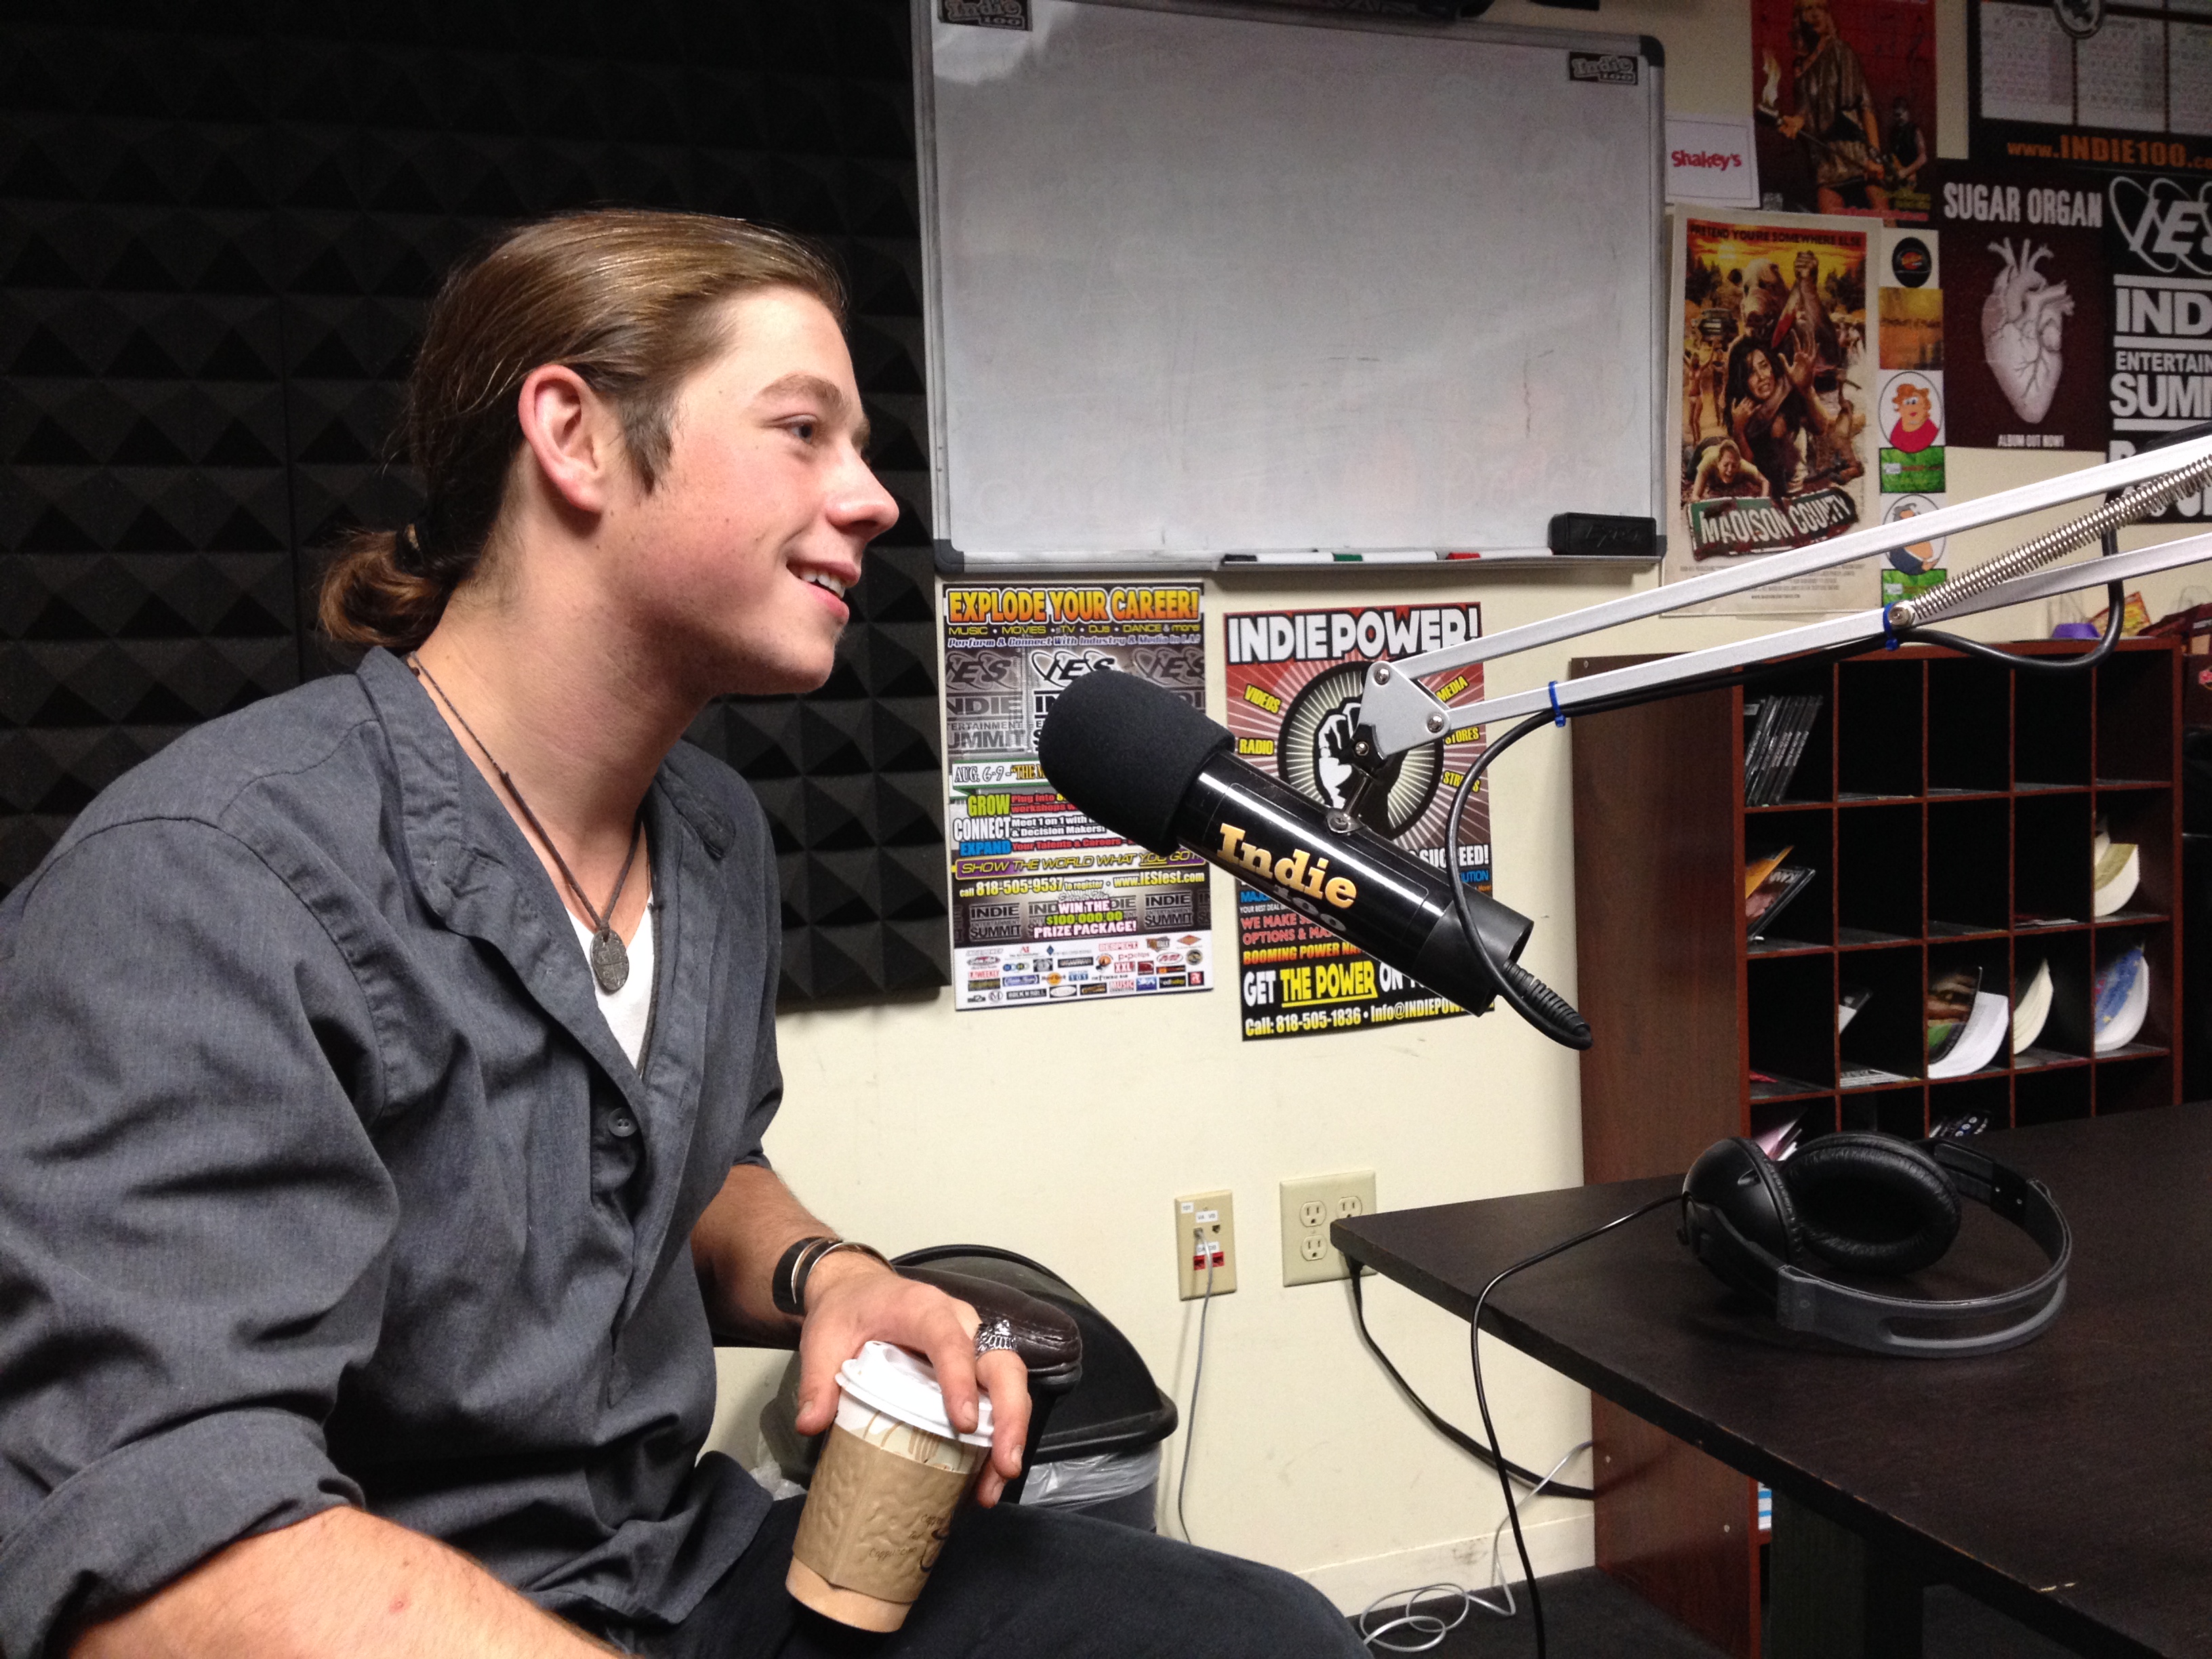 David Topp, being interviewed by Tyrone Tann on Indie100.com Los Angeles, California